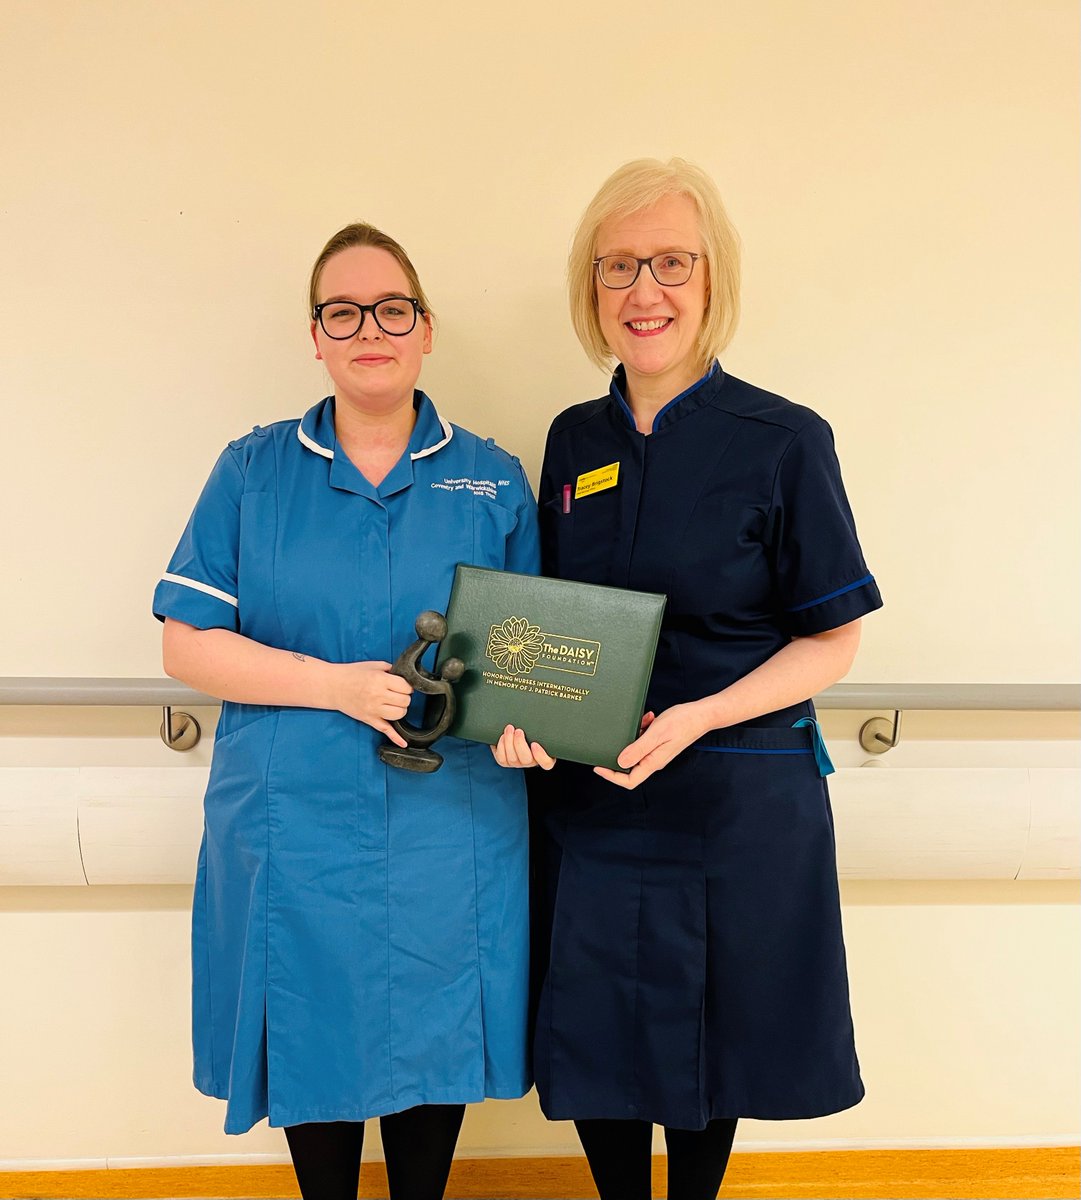 🌼Mollie, a Registered Nurse in our Medical Assessment Unit, is our latest DAISY Award honouree. Mollie was nominated by a patient who came in with high blood pressure and suffered an anxiety attack. 💙Well done Mollie!